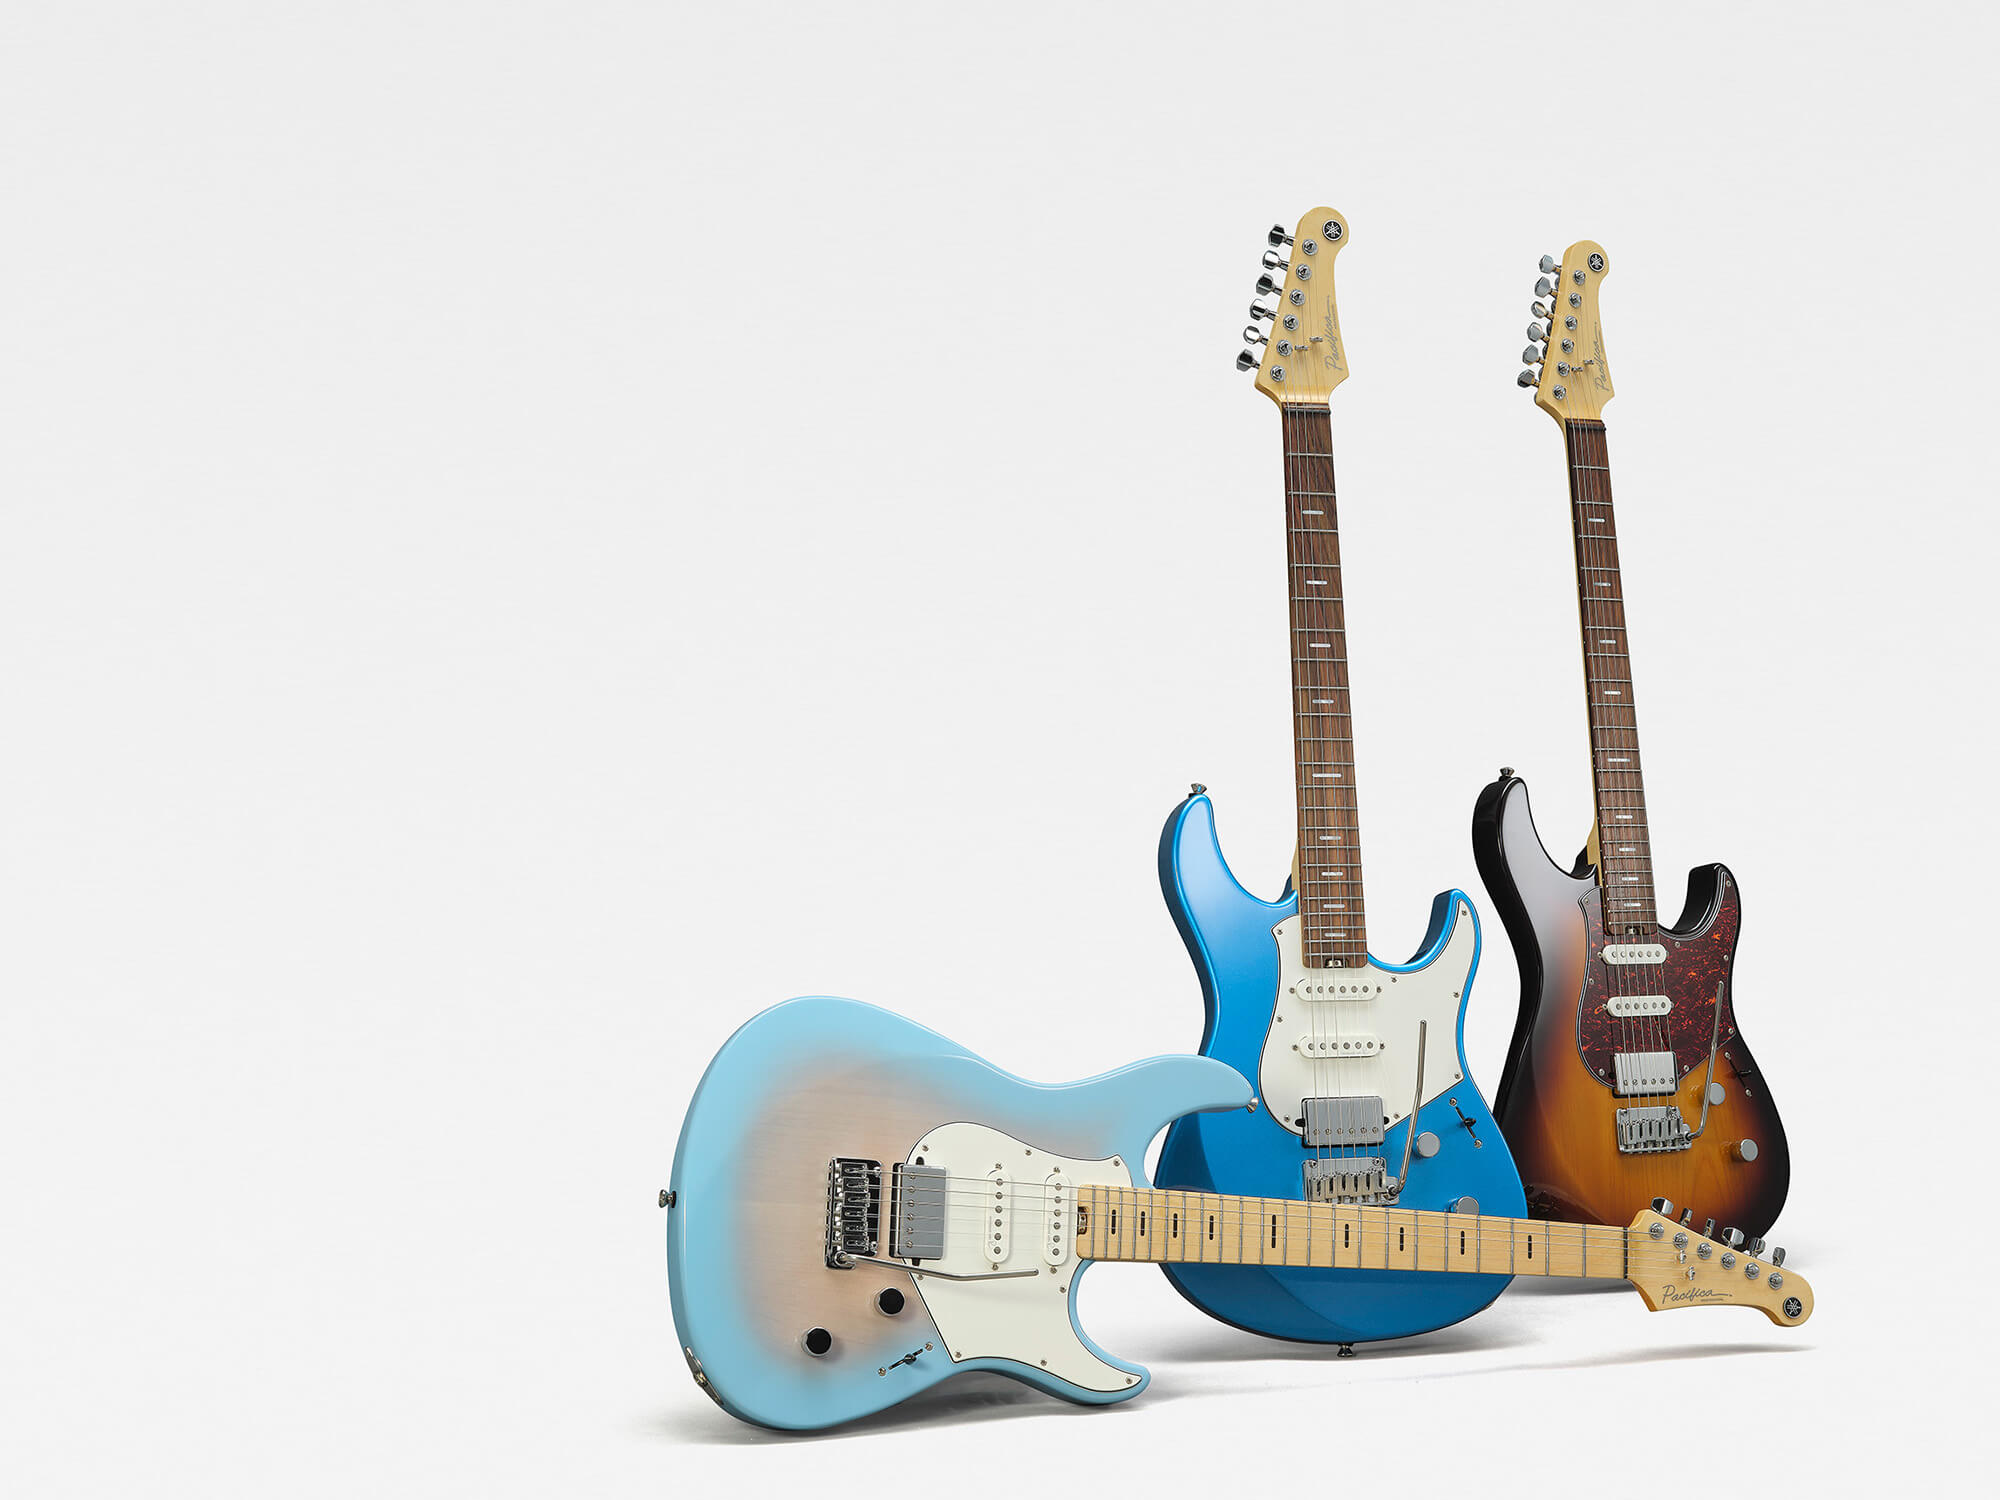 Three new Yamaha Pacifica models. Two are stood upright - one is blue and the other is a warm wooden tone - and a pale blue model with a gradient pink finish is on its side.